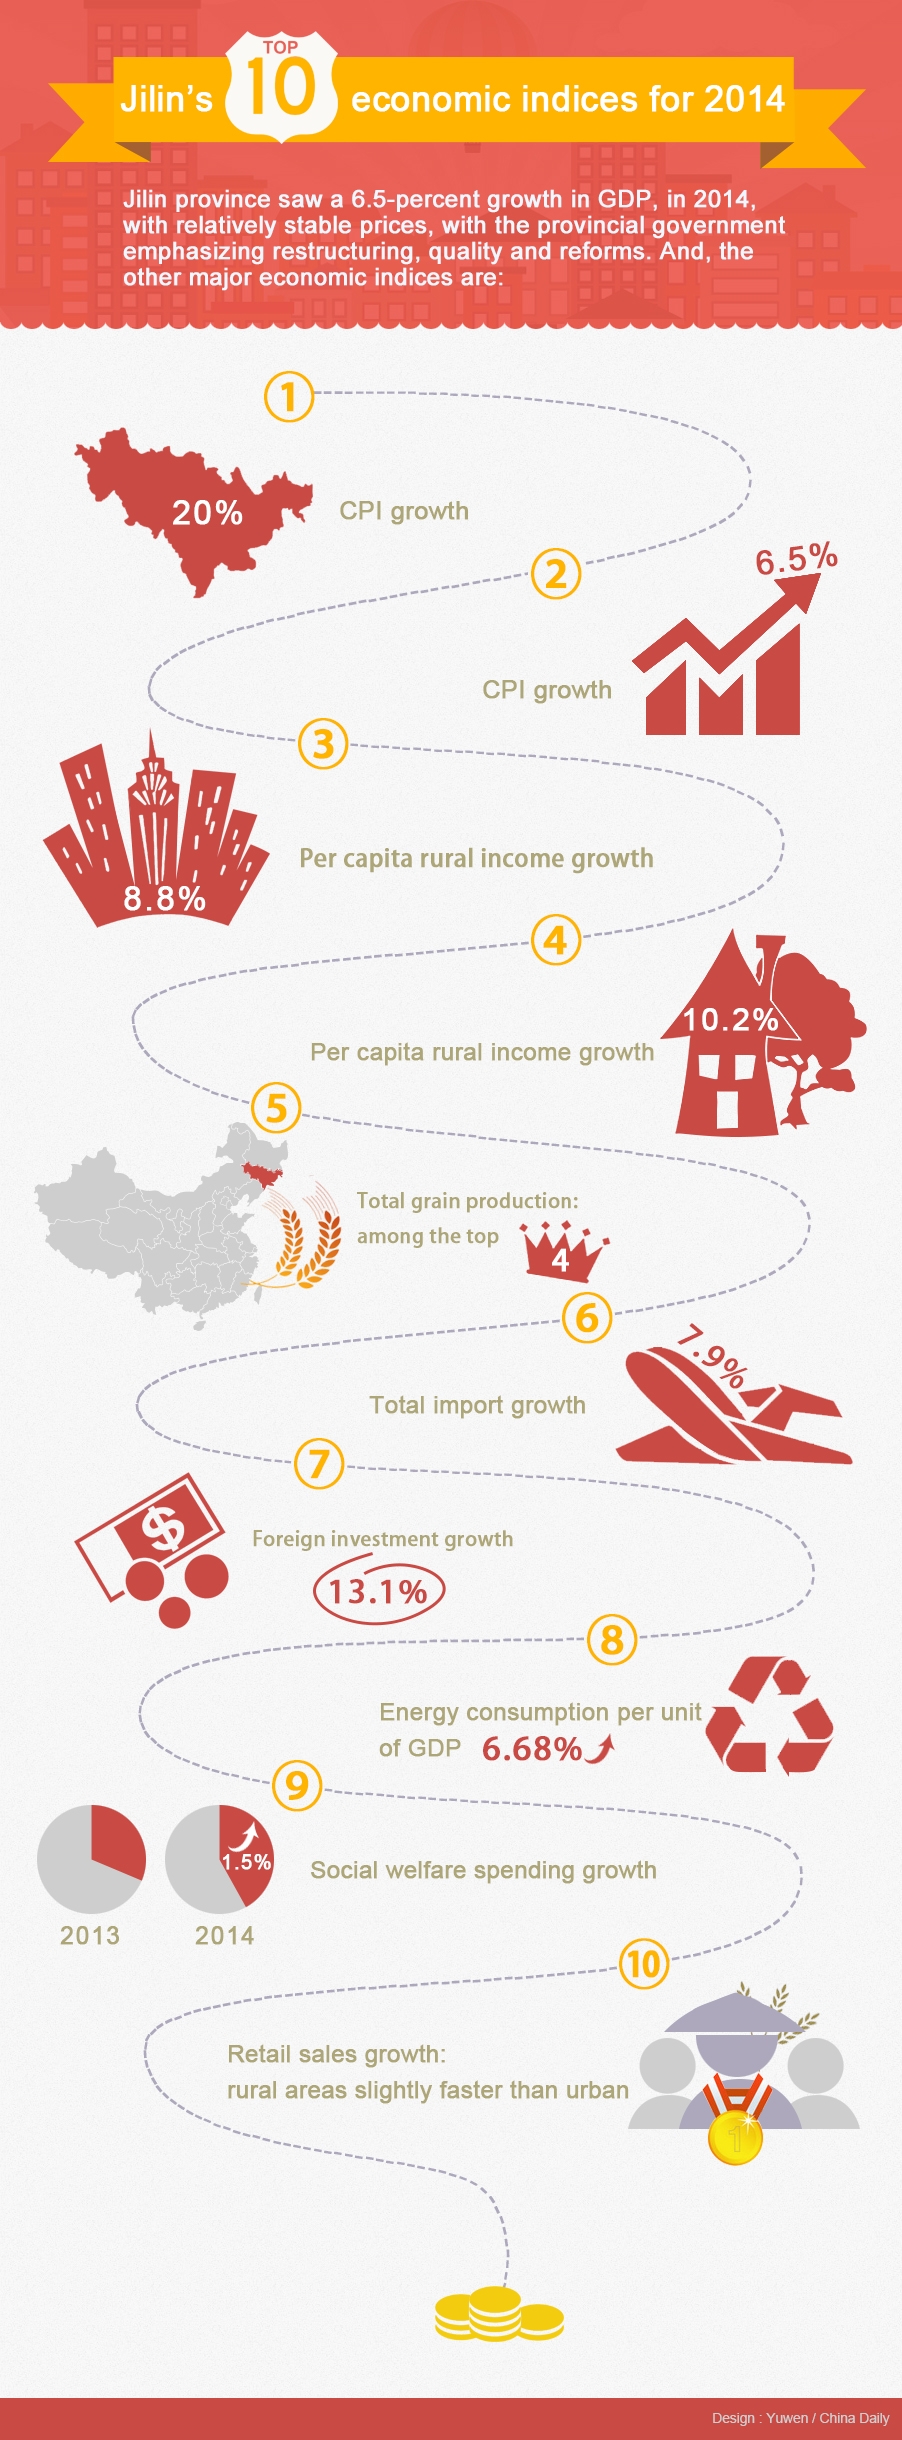 Jilin's top 10 economic indices for 2014